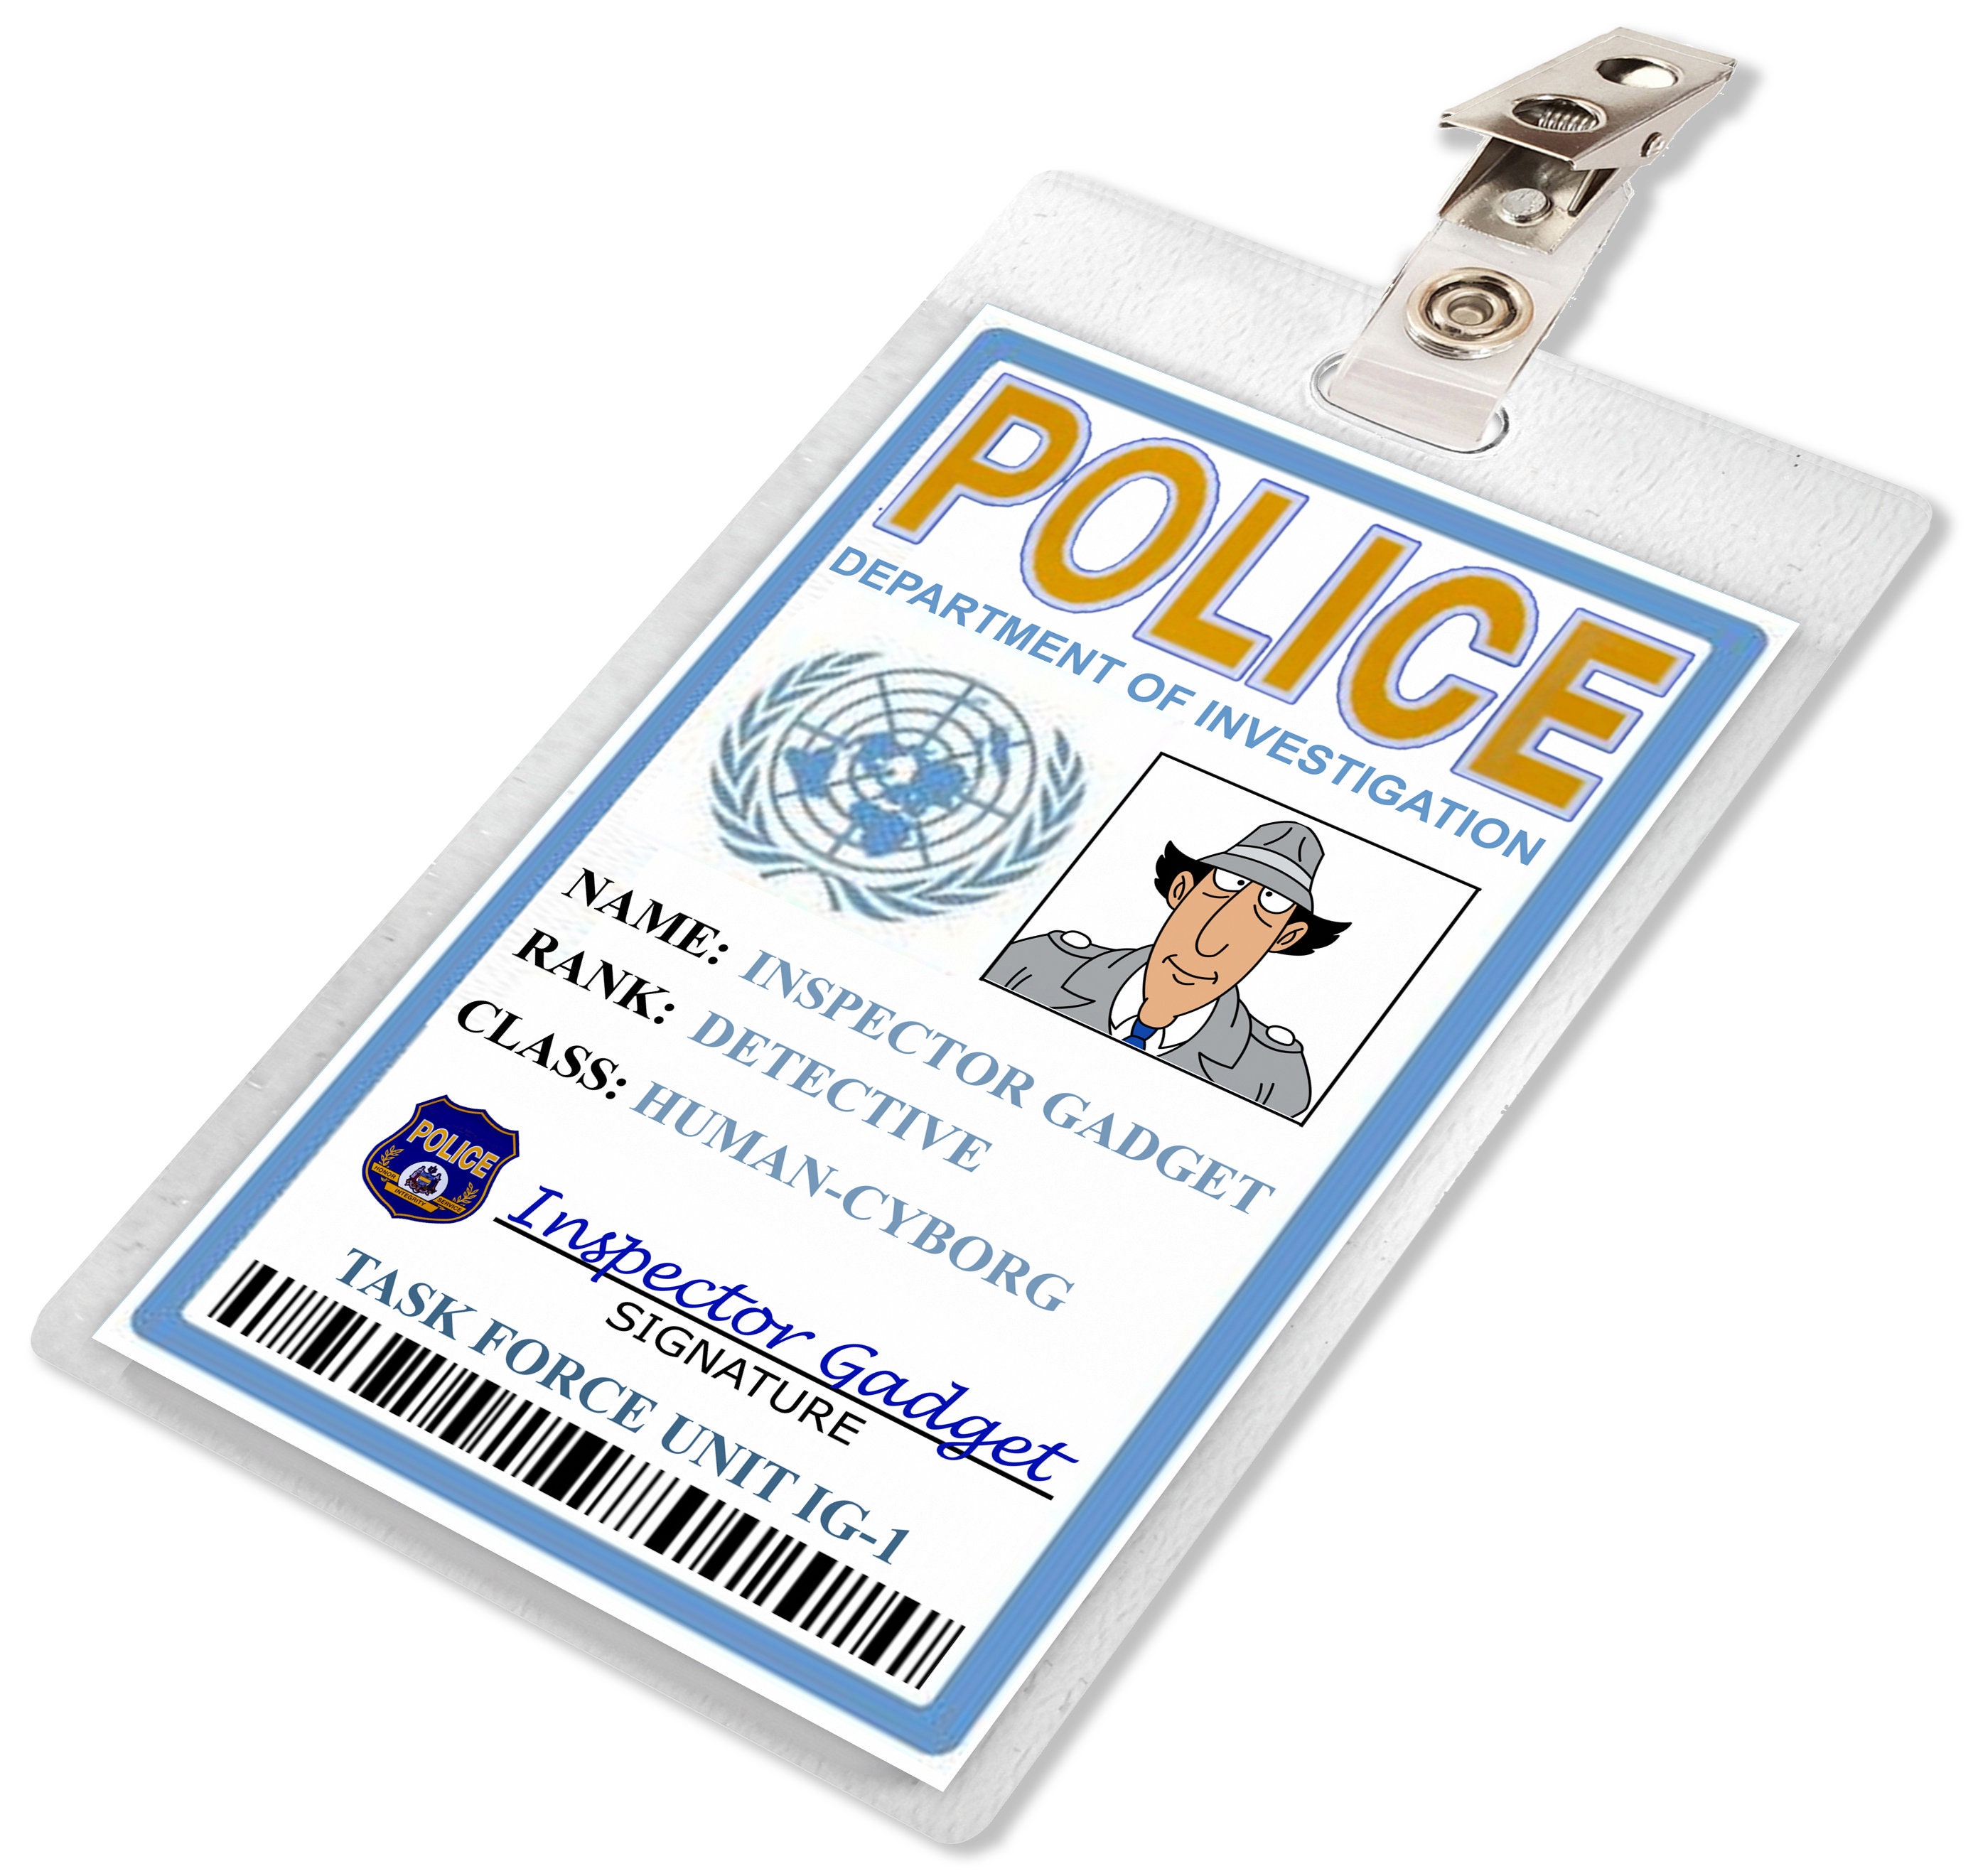 inspector-gadget-metro-police-detective-id-badge-card-name-etsy